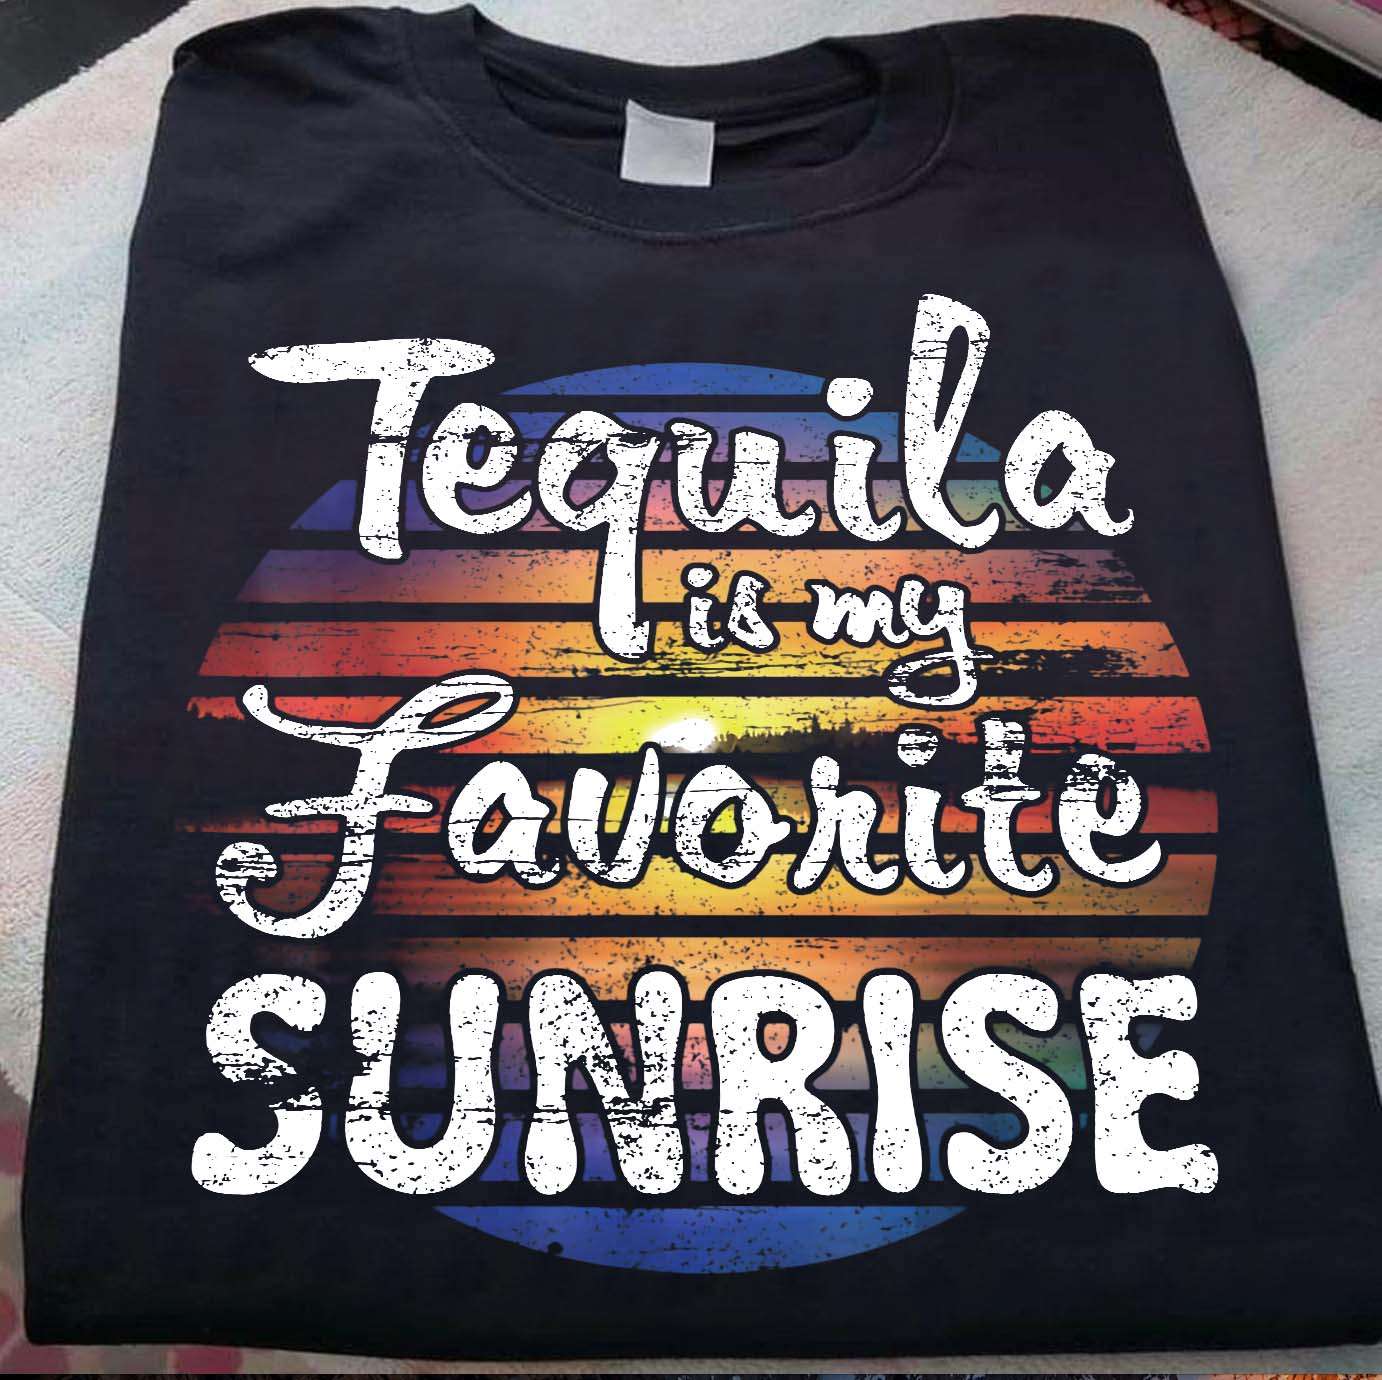 Tequila is my favourite sunrise